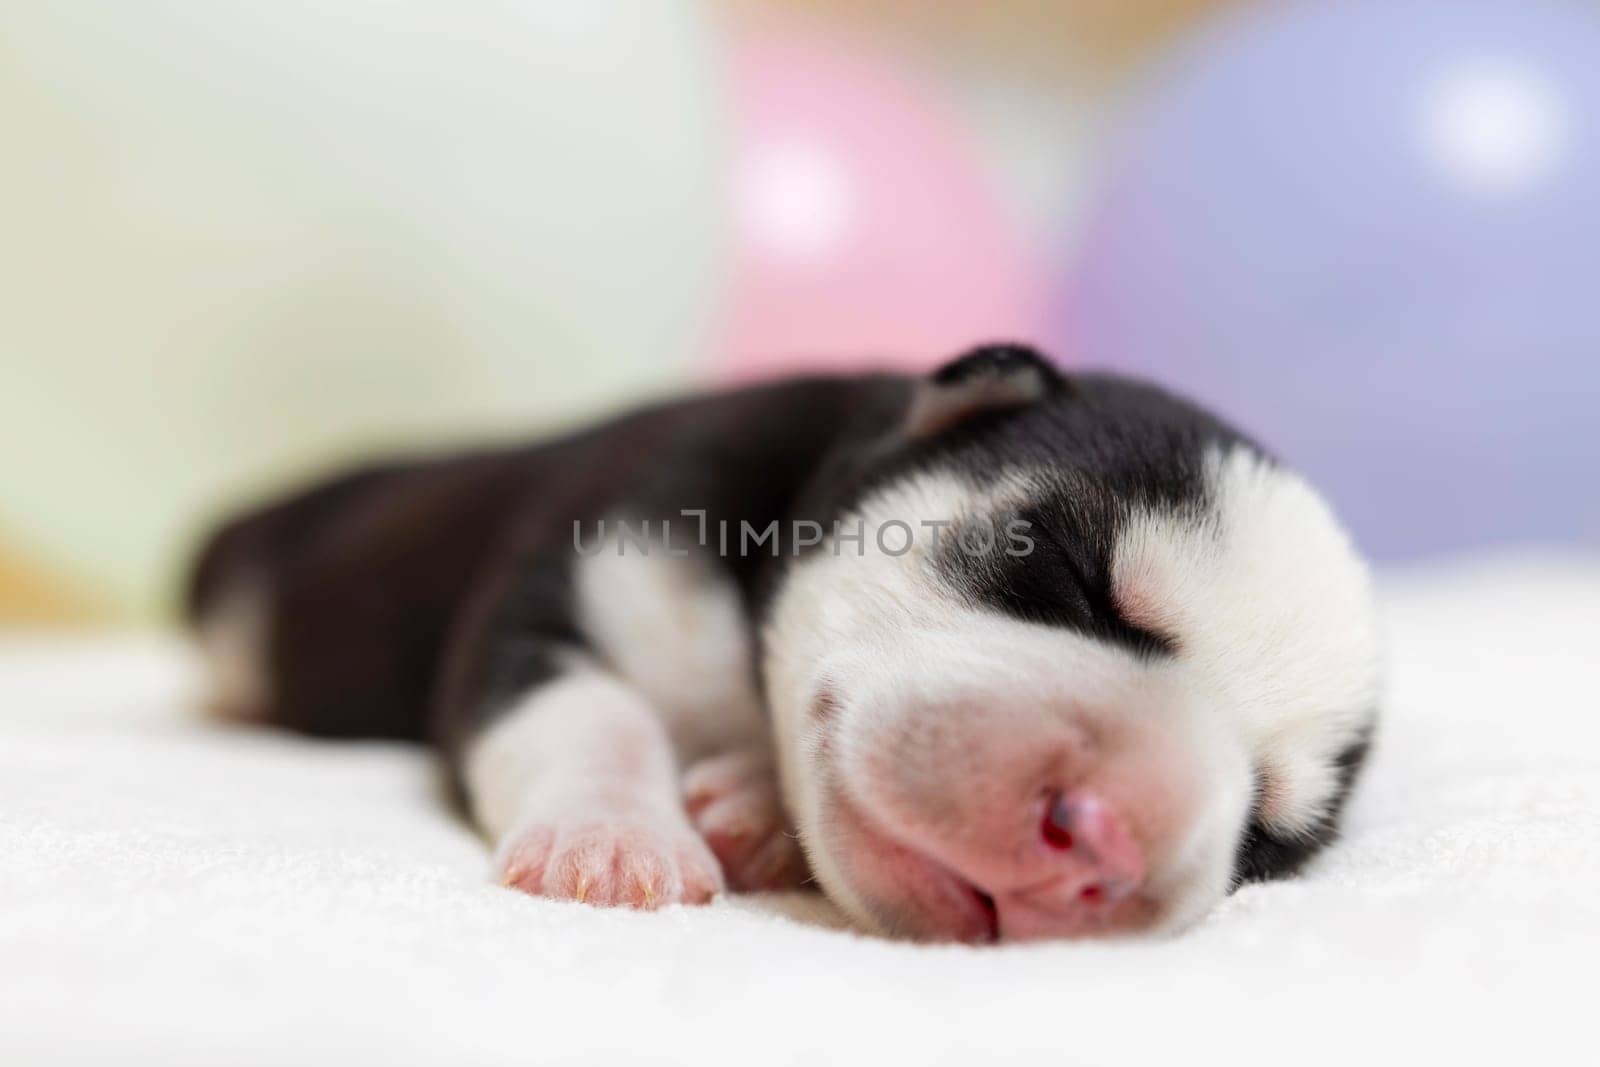 Newborn Puppy Asleep with Colorful Balloons by andreyz